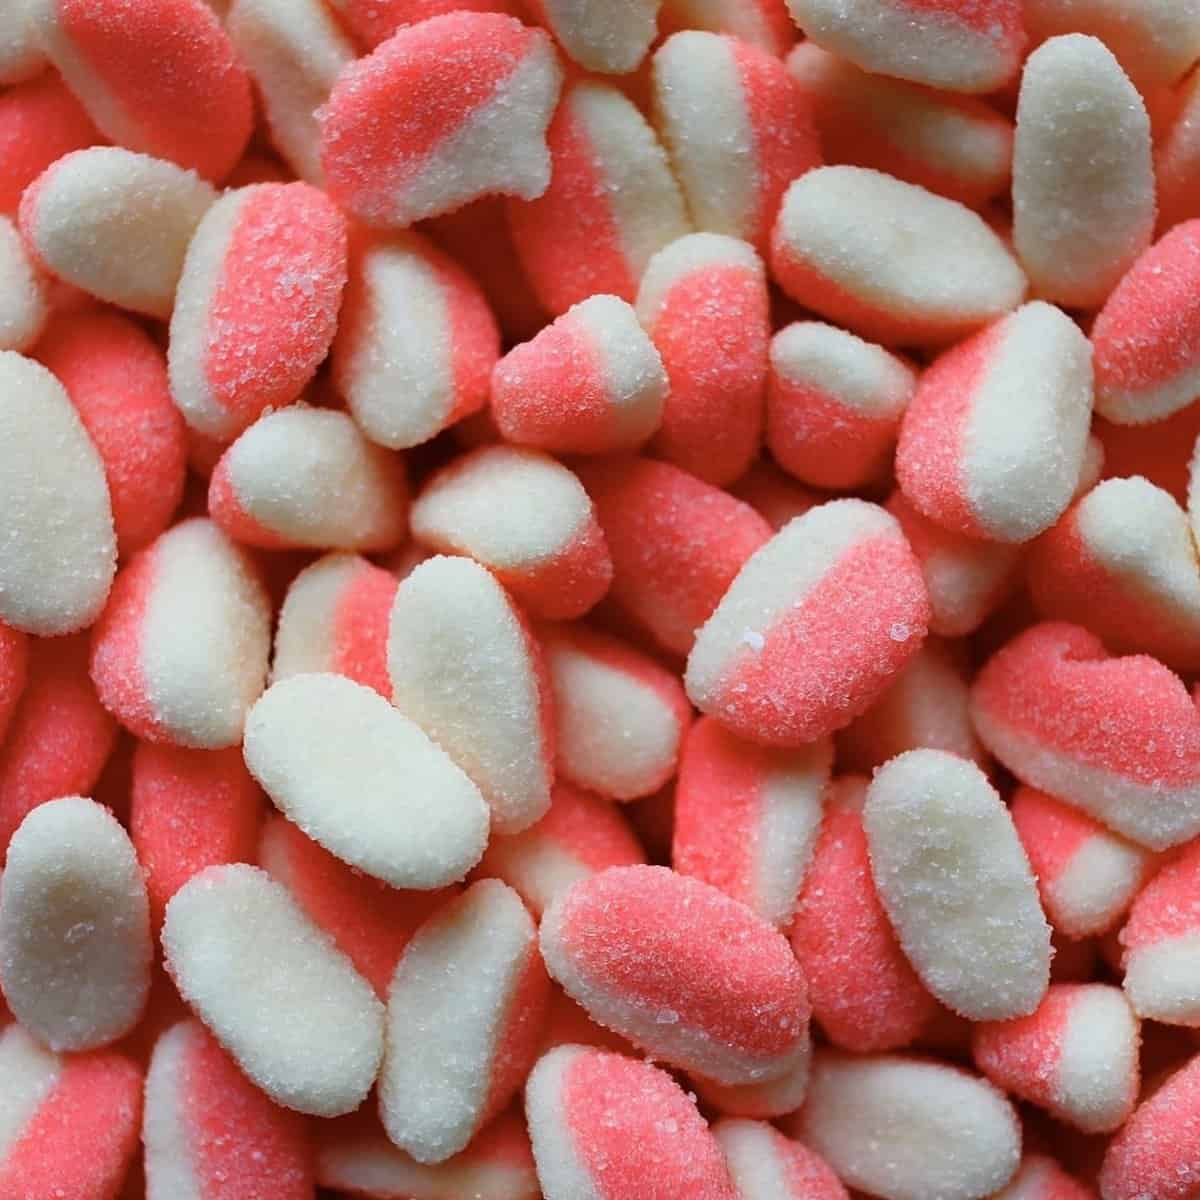 Pink Puffs Sweets 100g (Halal)